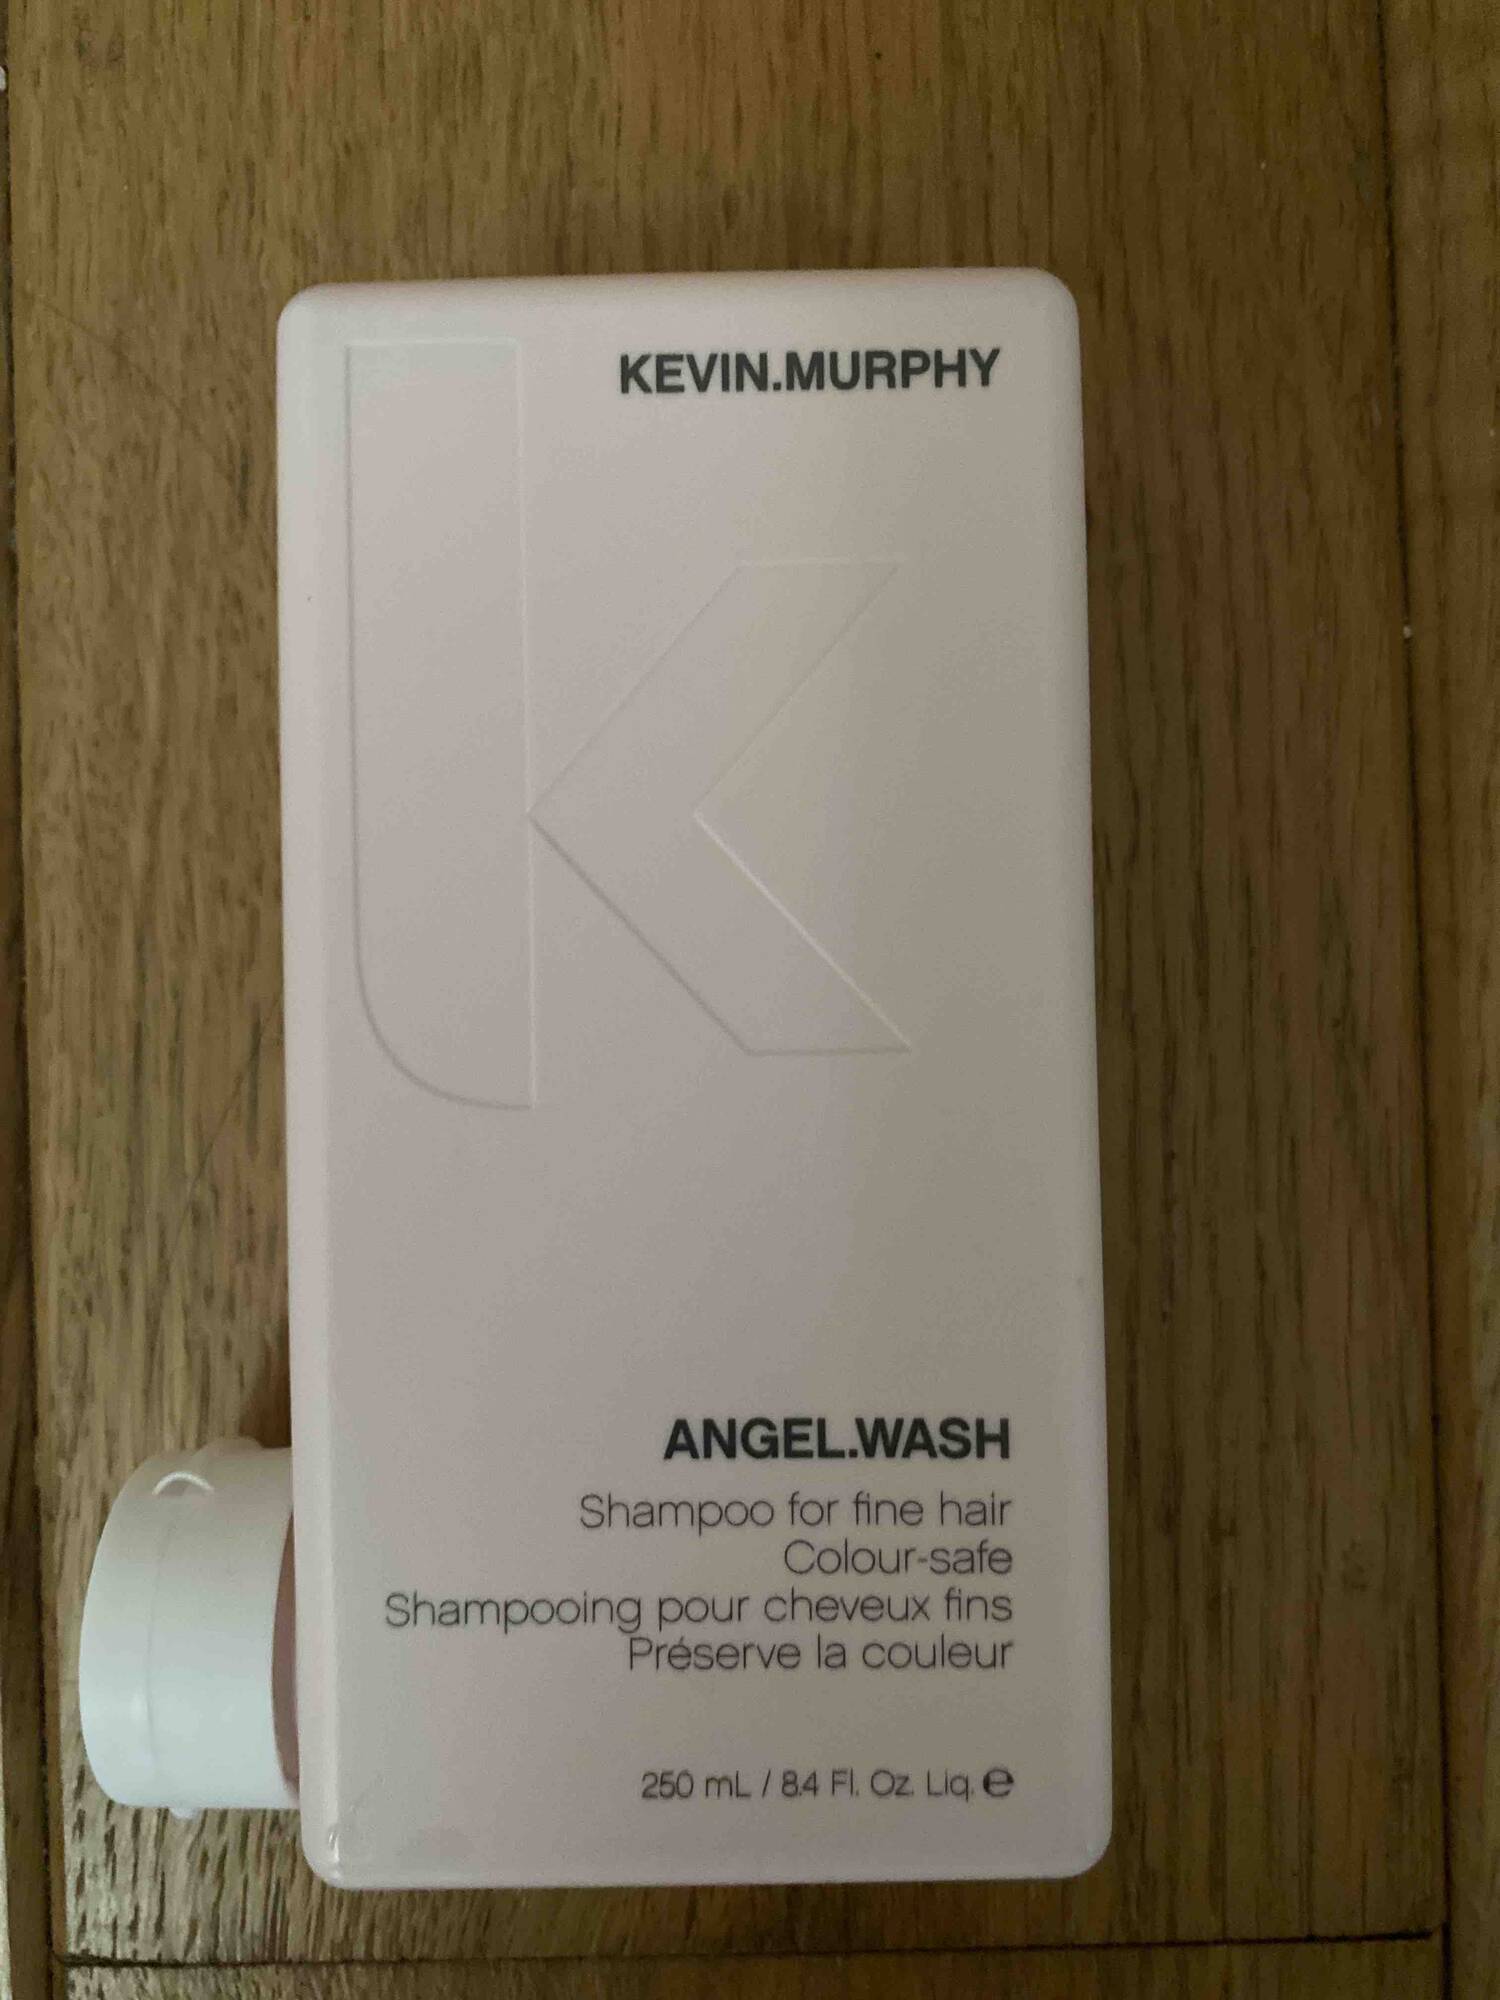 KEVIN MURPHY - Angel.wash - Shampooing pour cheveux fins 